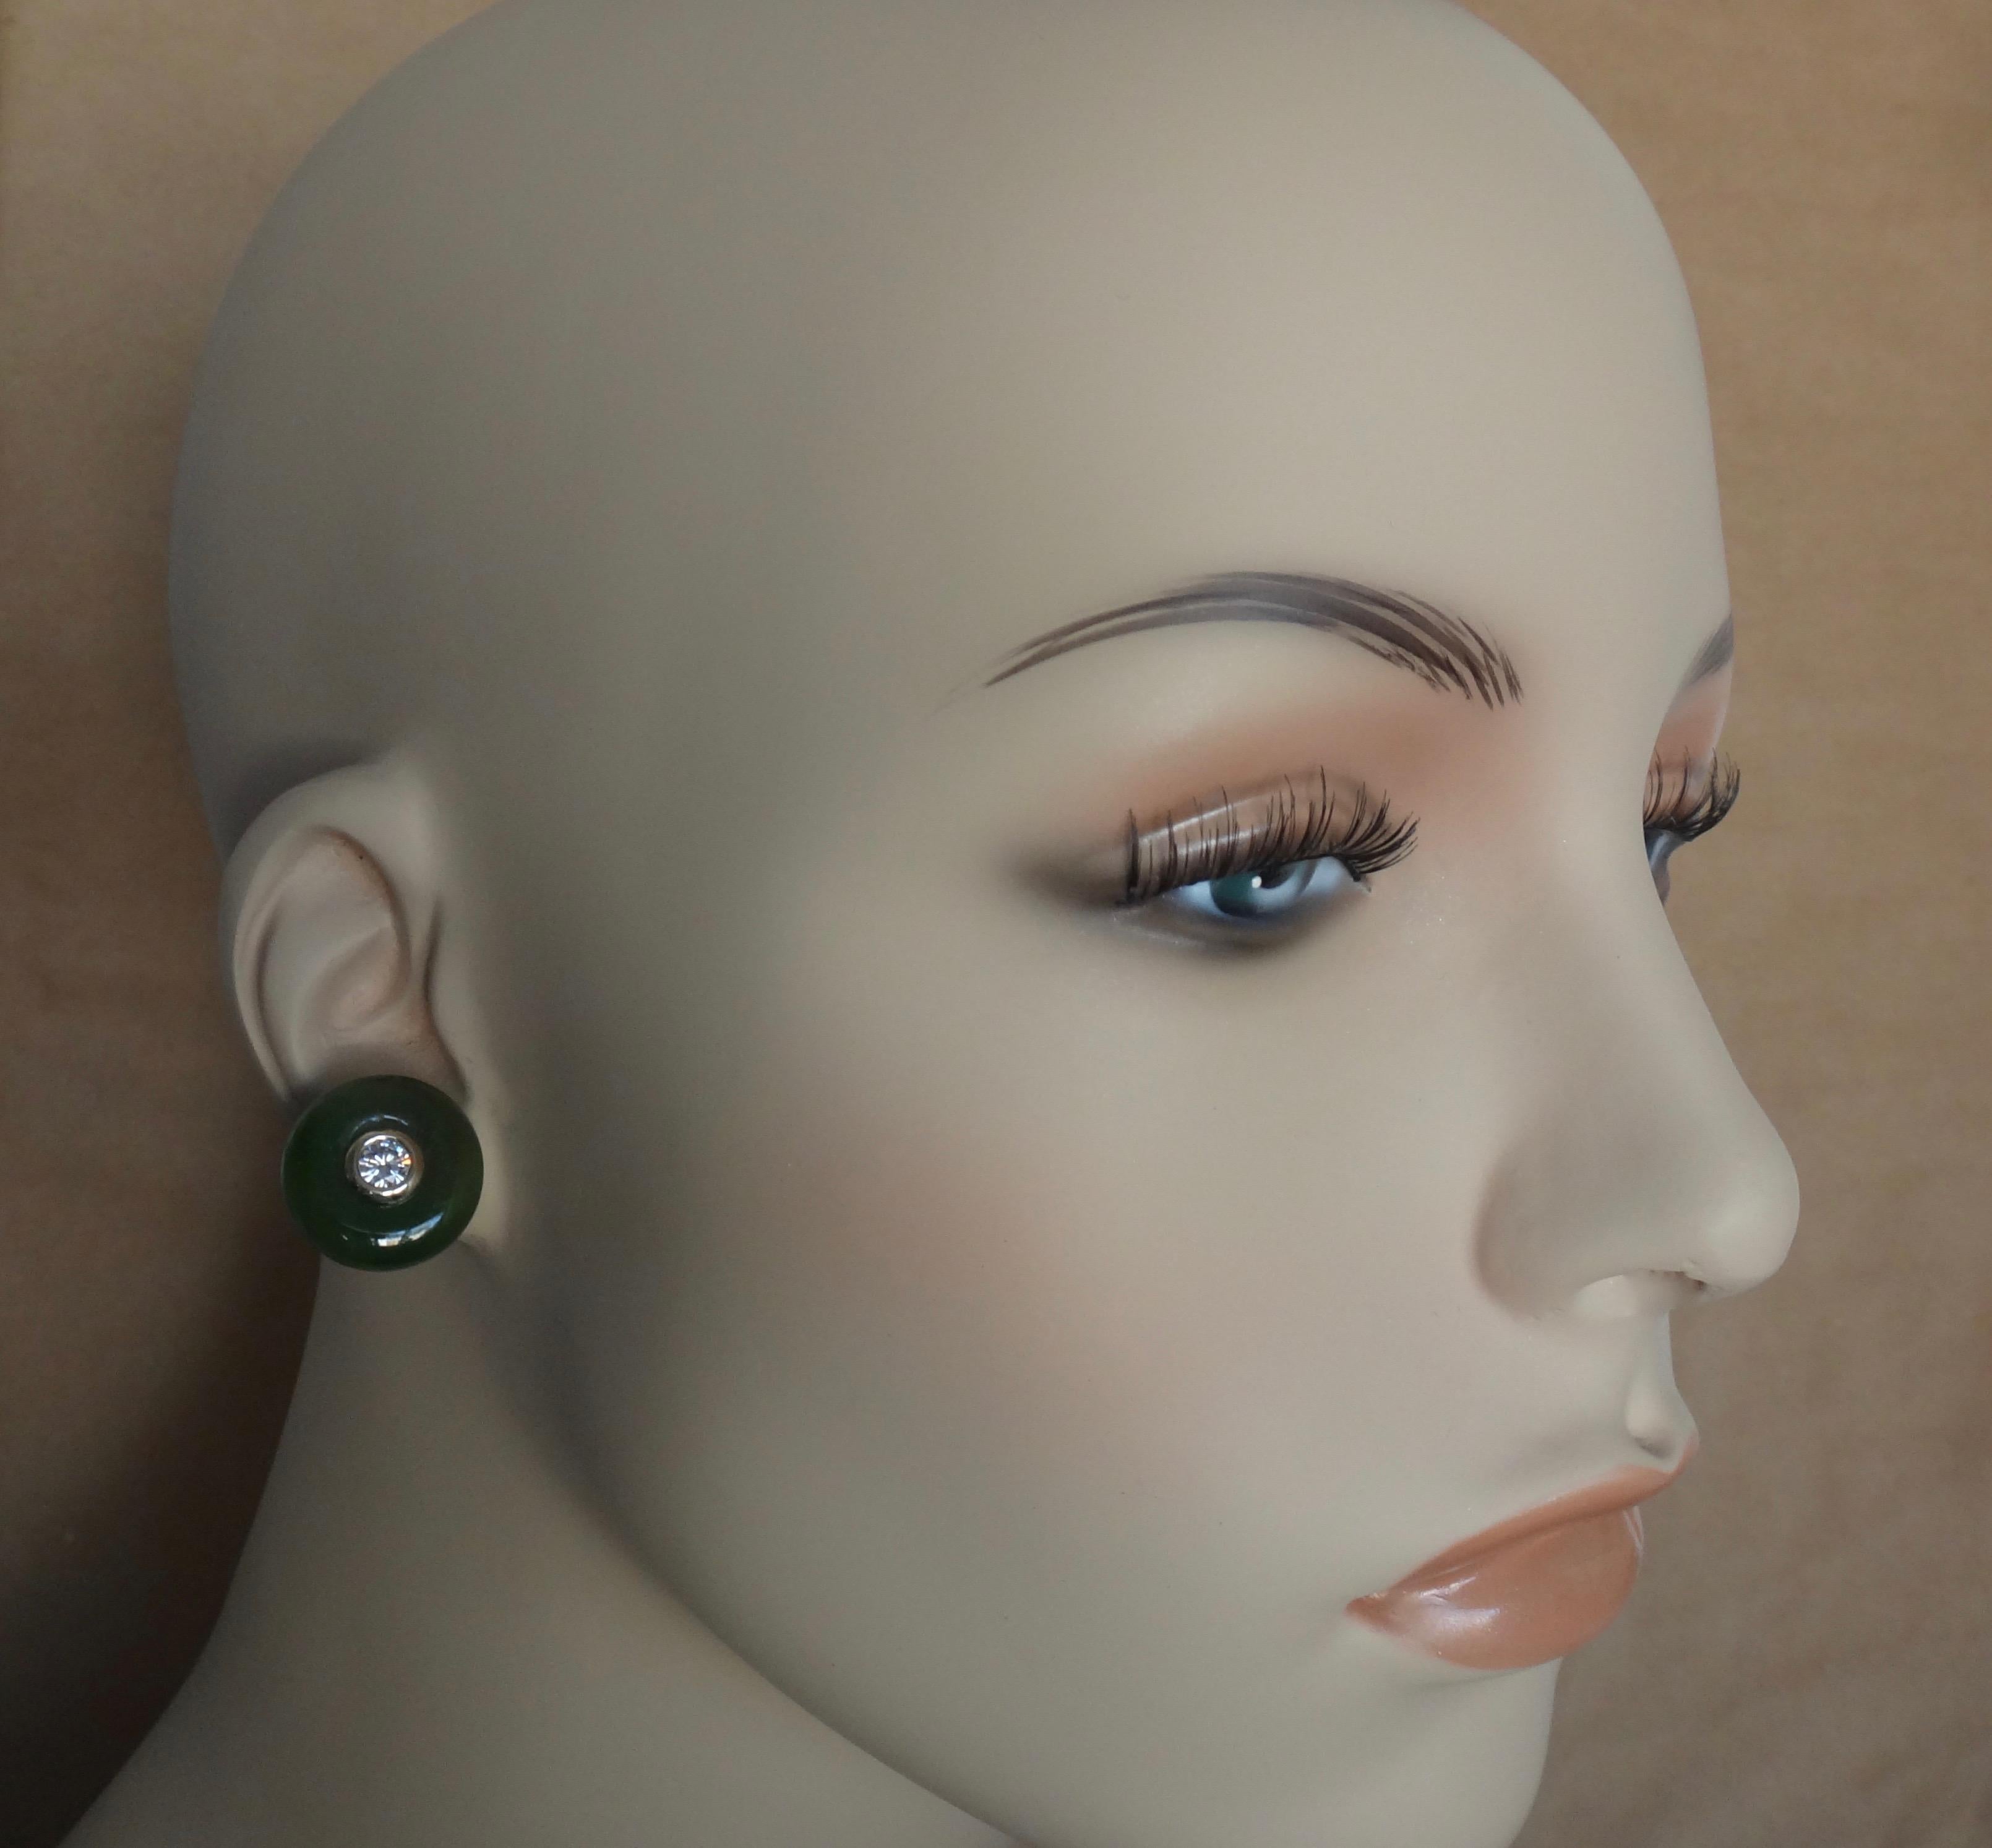 Jadeite discs (origin: Myanmar) in modeled shades of green are embellished with bezel set, brilliant cut white diamonds.  The jadeite possesses a glassy polish typical of the material.  The earrings have 18k posts with omega clip backs for comfort